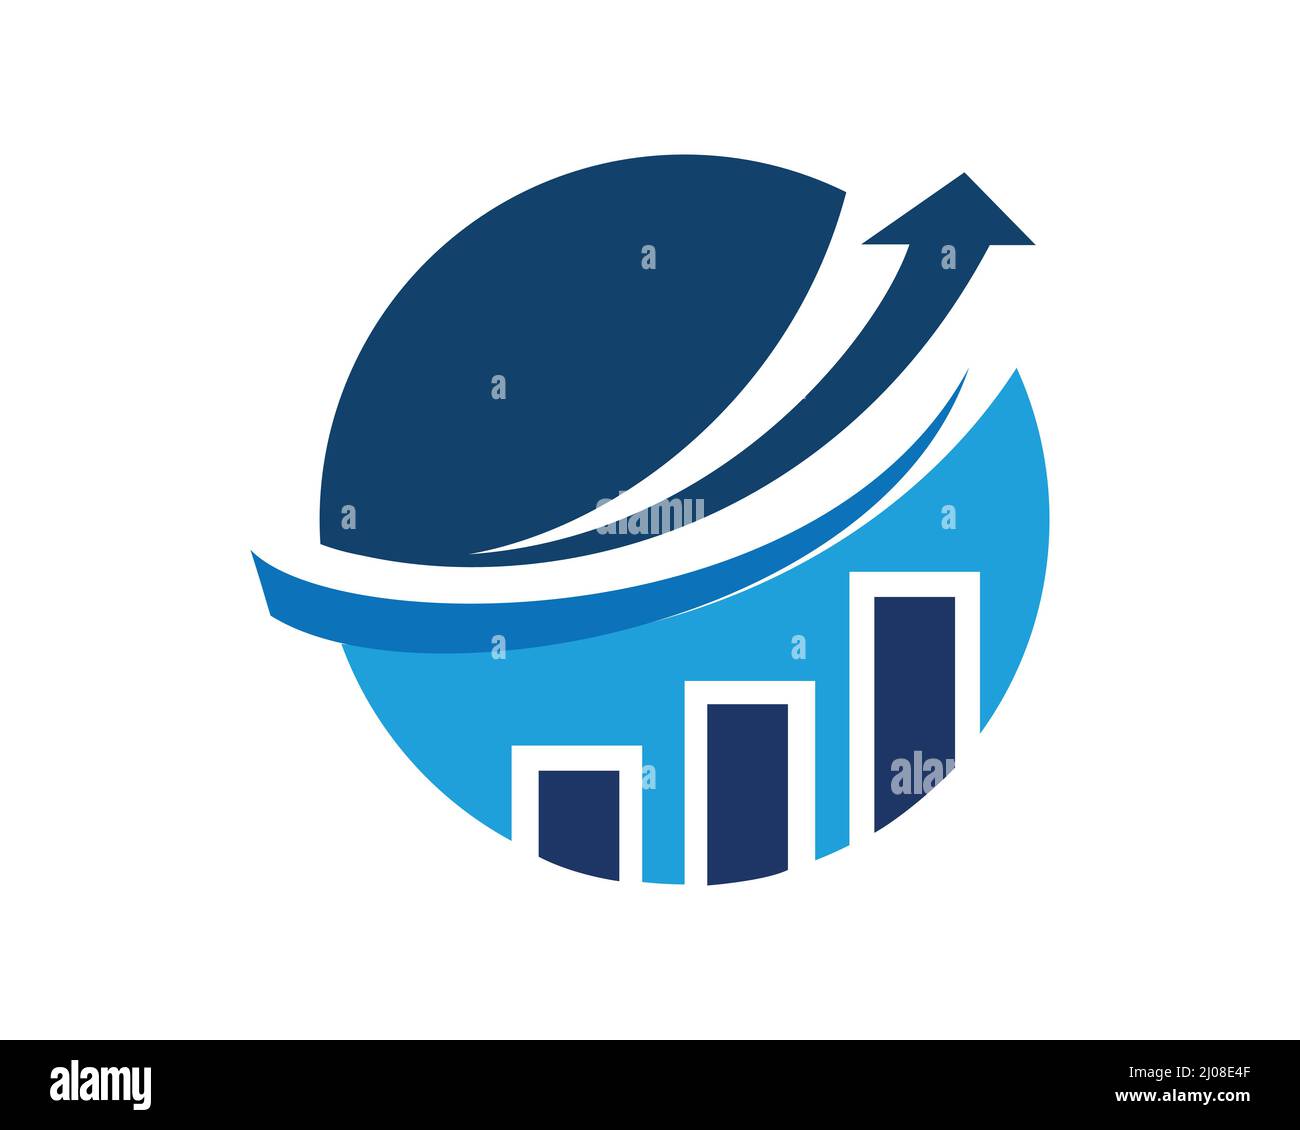 Business Growth with Statistic and Diagram Symbol Illustration Stock Vector